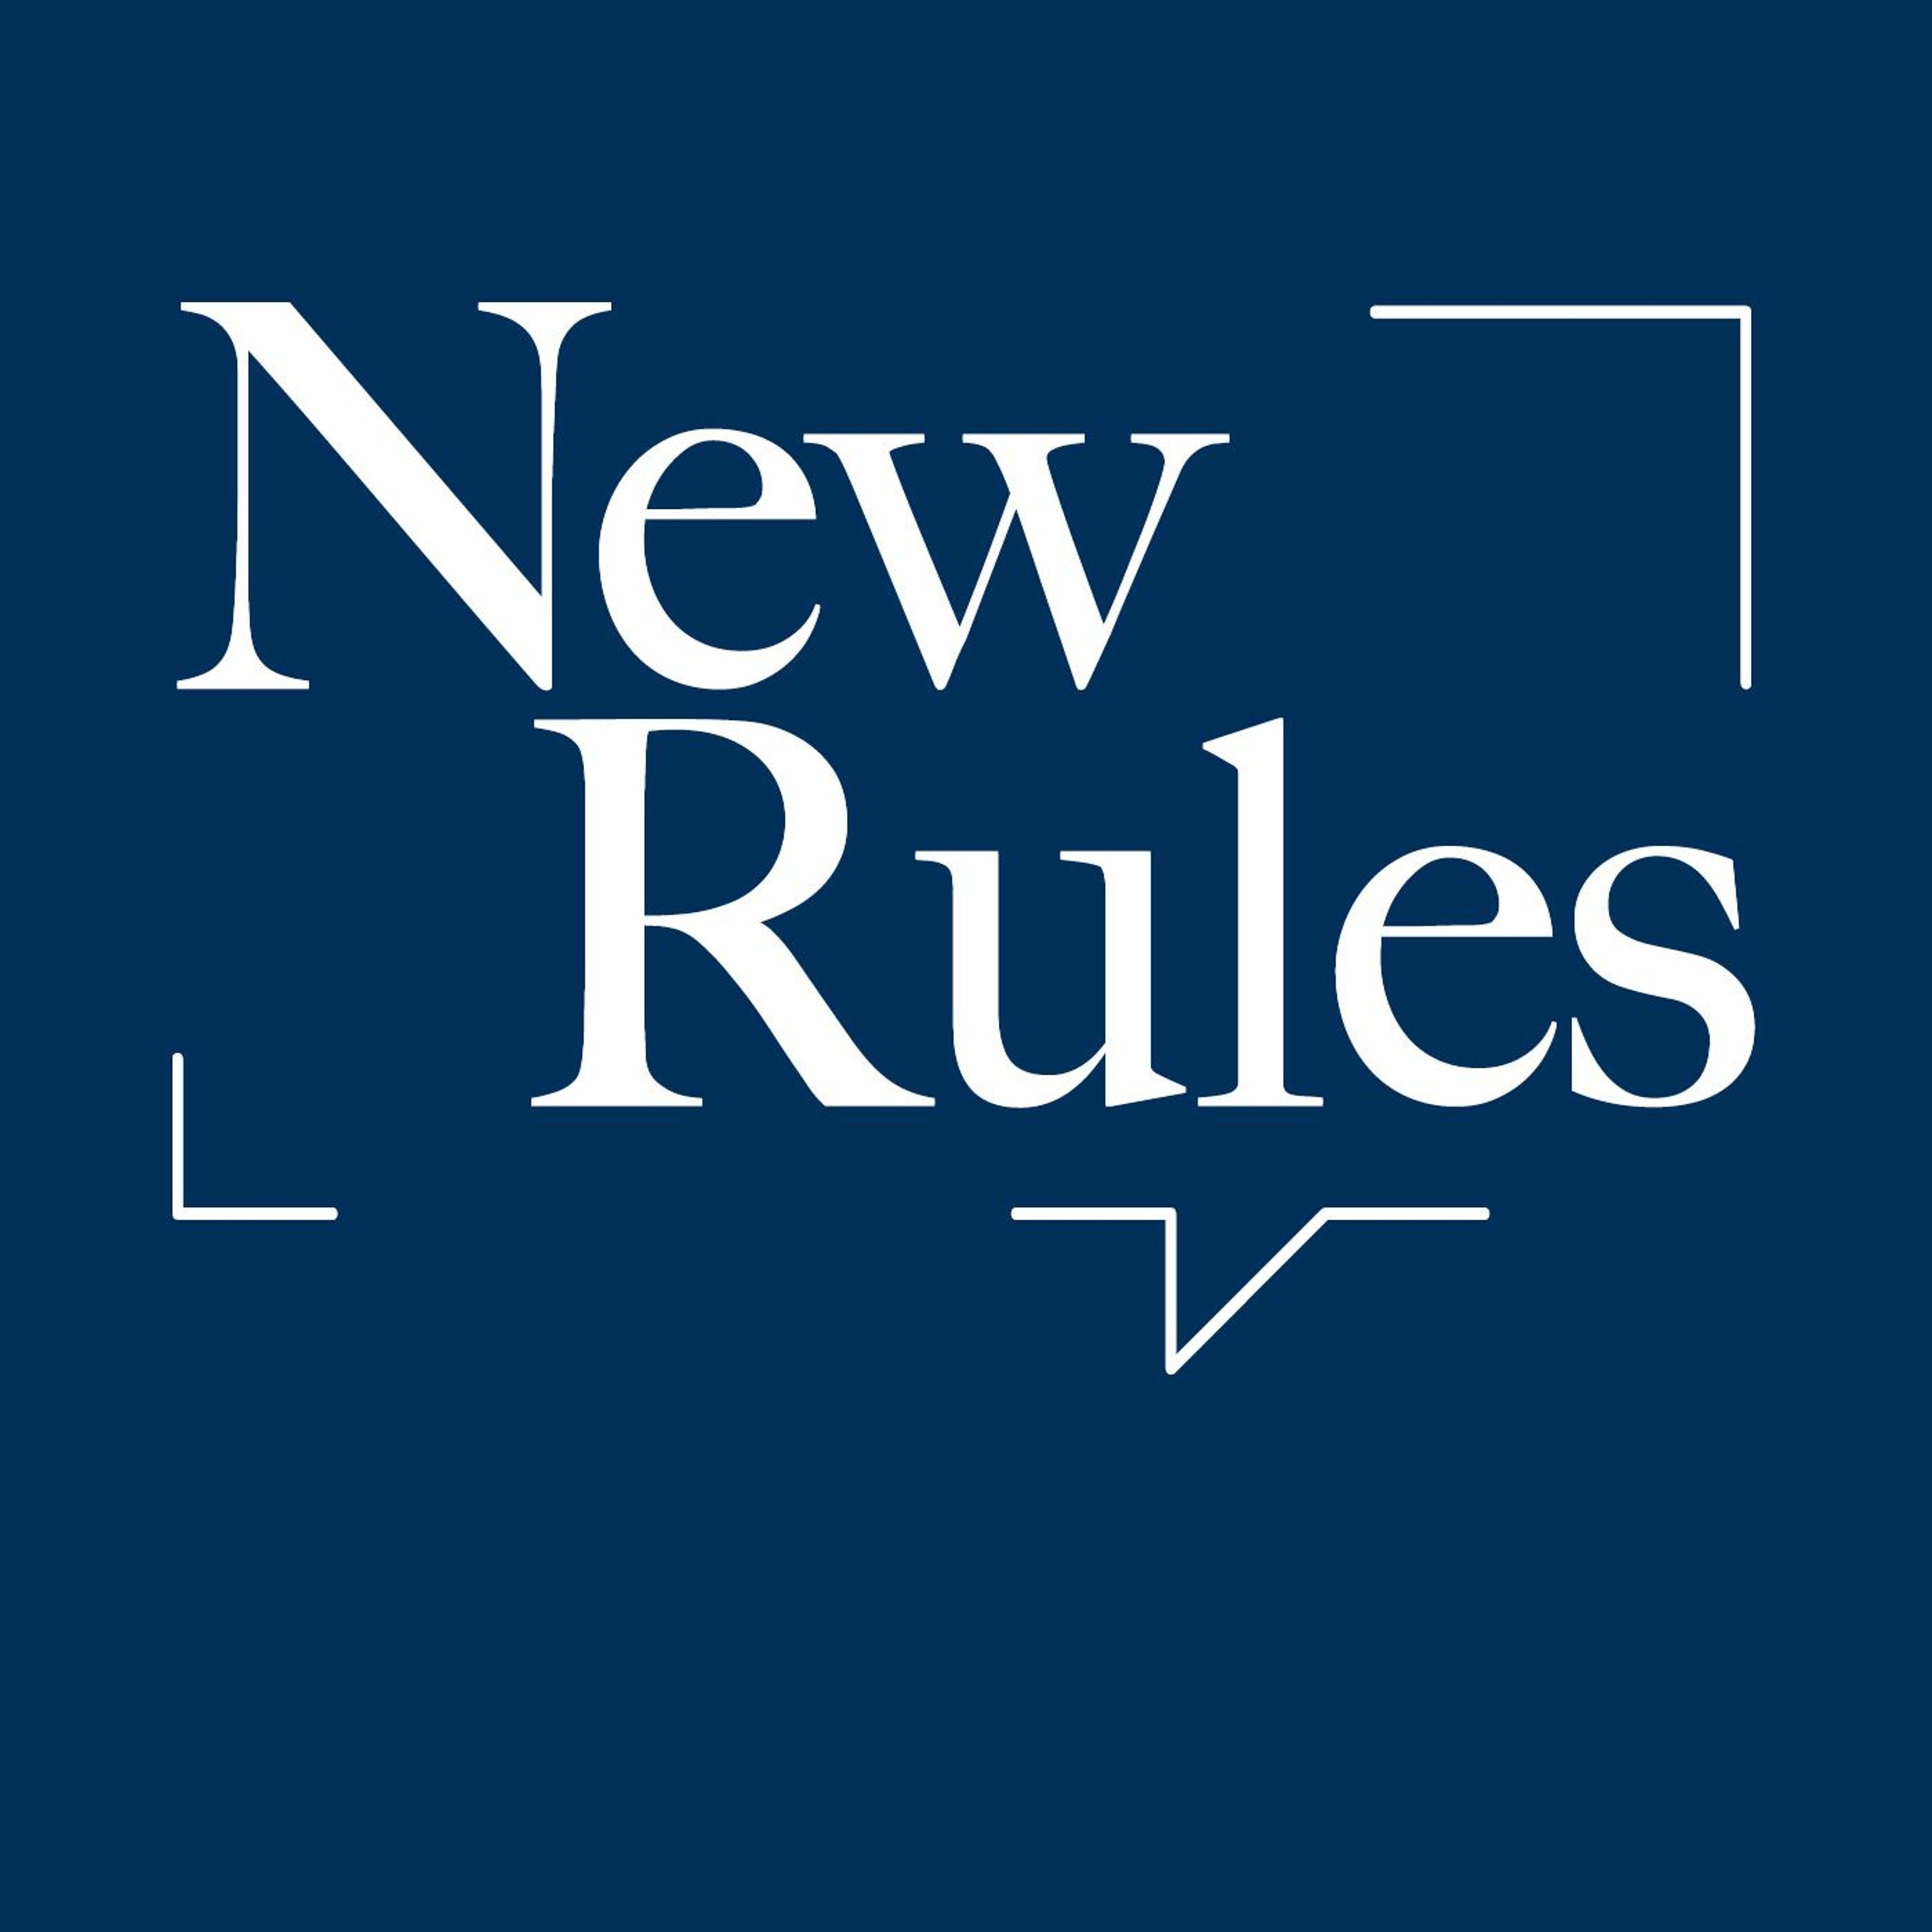 The New Rules. Алек Макгэрри New Rules. New Rules на обои. Футаж New Rules. Хит new rules